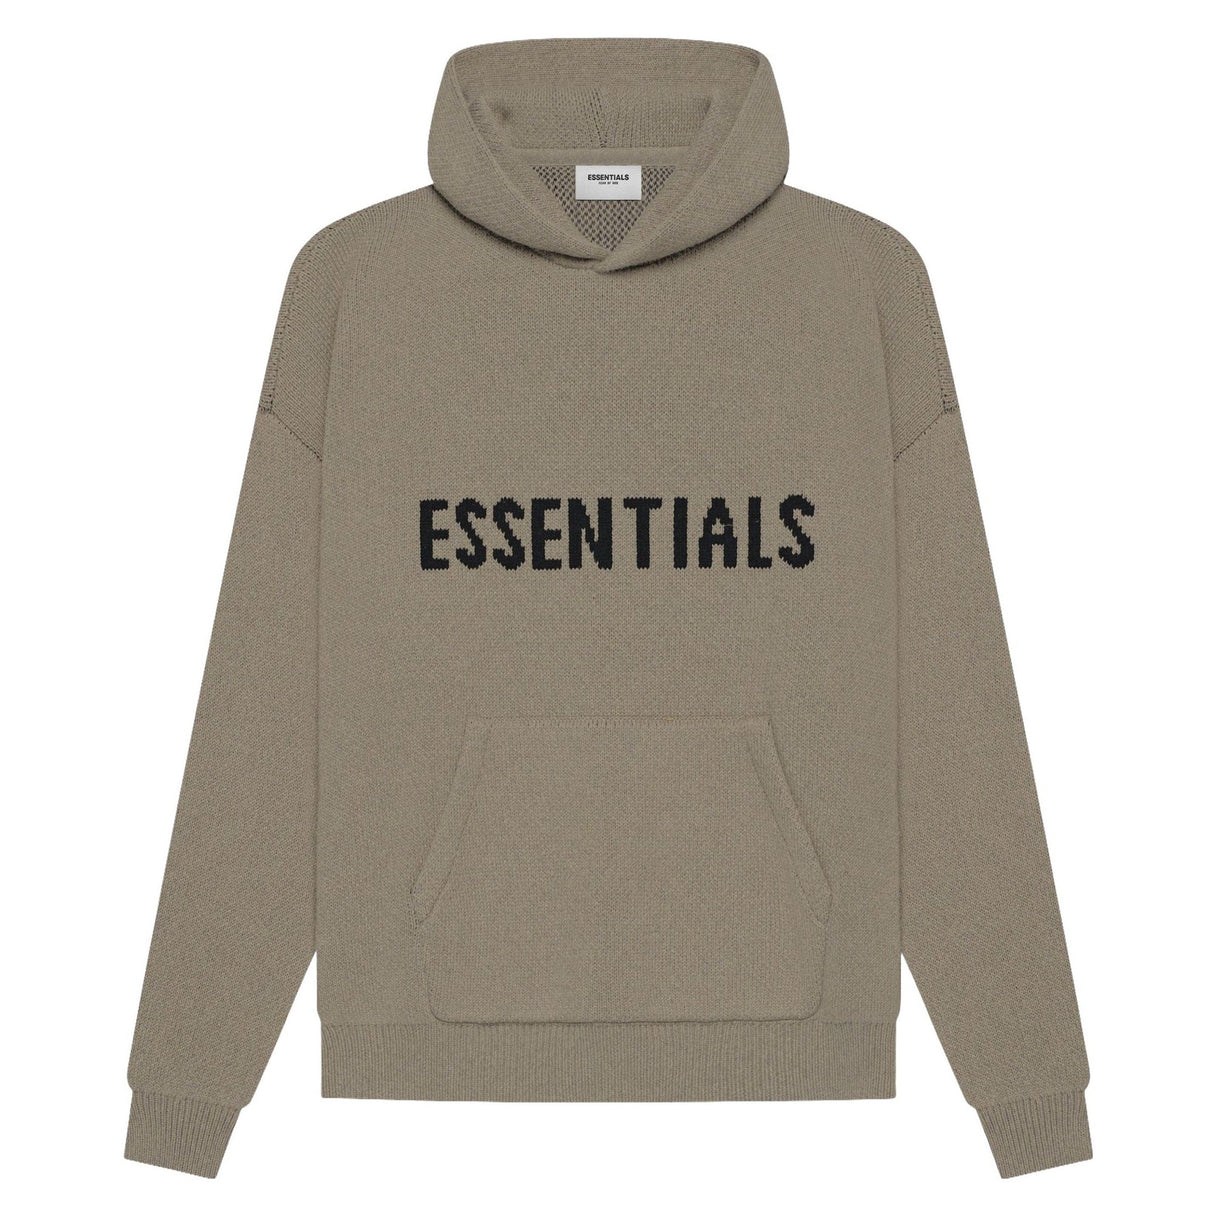 Essentials Knit Pullover "Taupe" - Dawntown